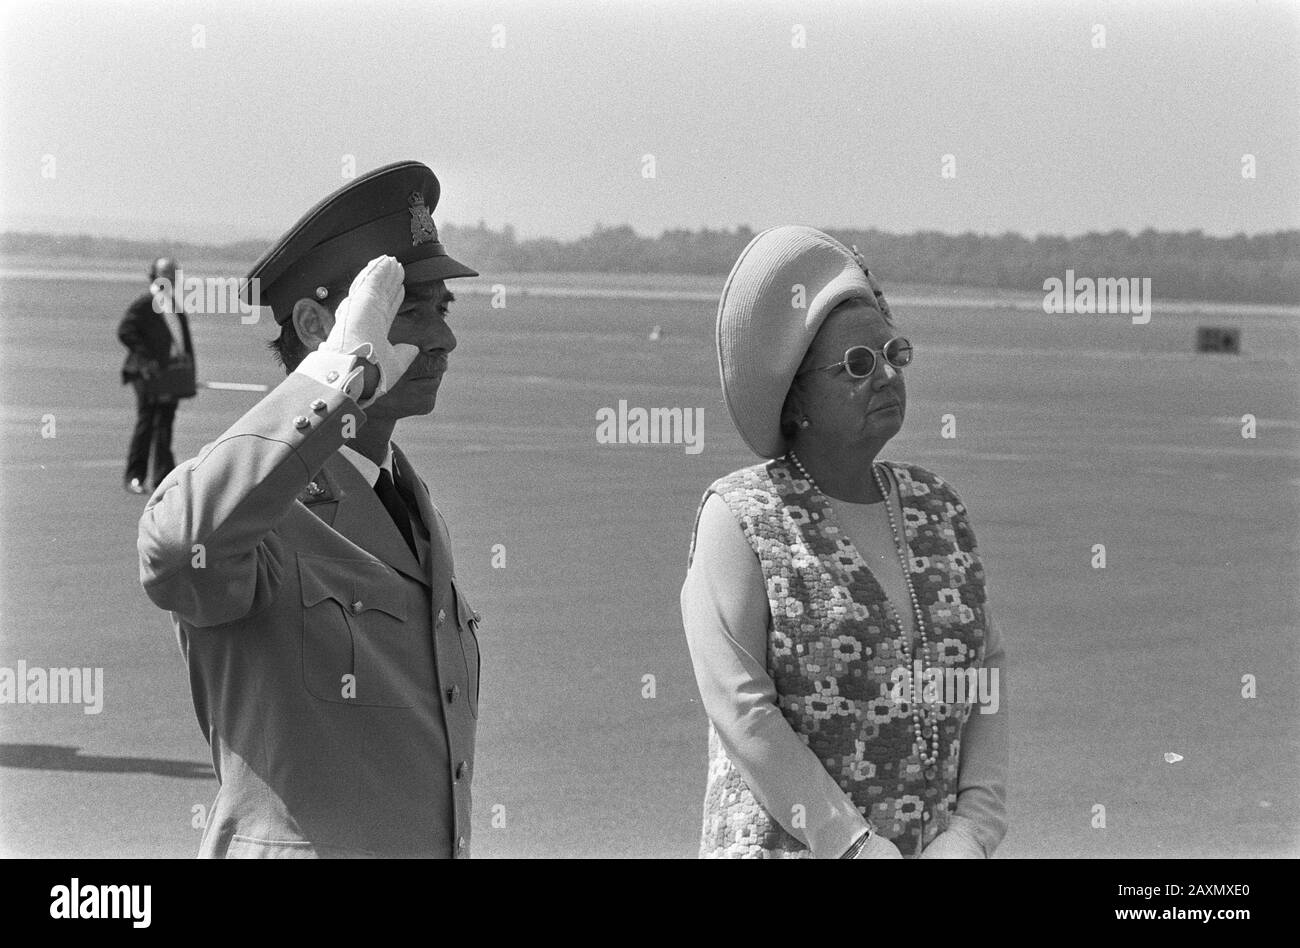 Original caption: Duke Jean of Luxembourg and Queen Juliana arriving at Luxembourg airport. - National Archives Stock Photo